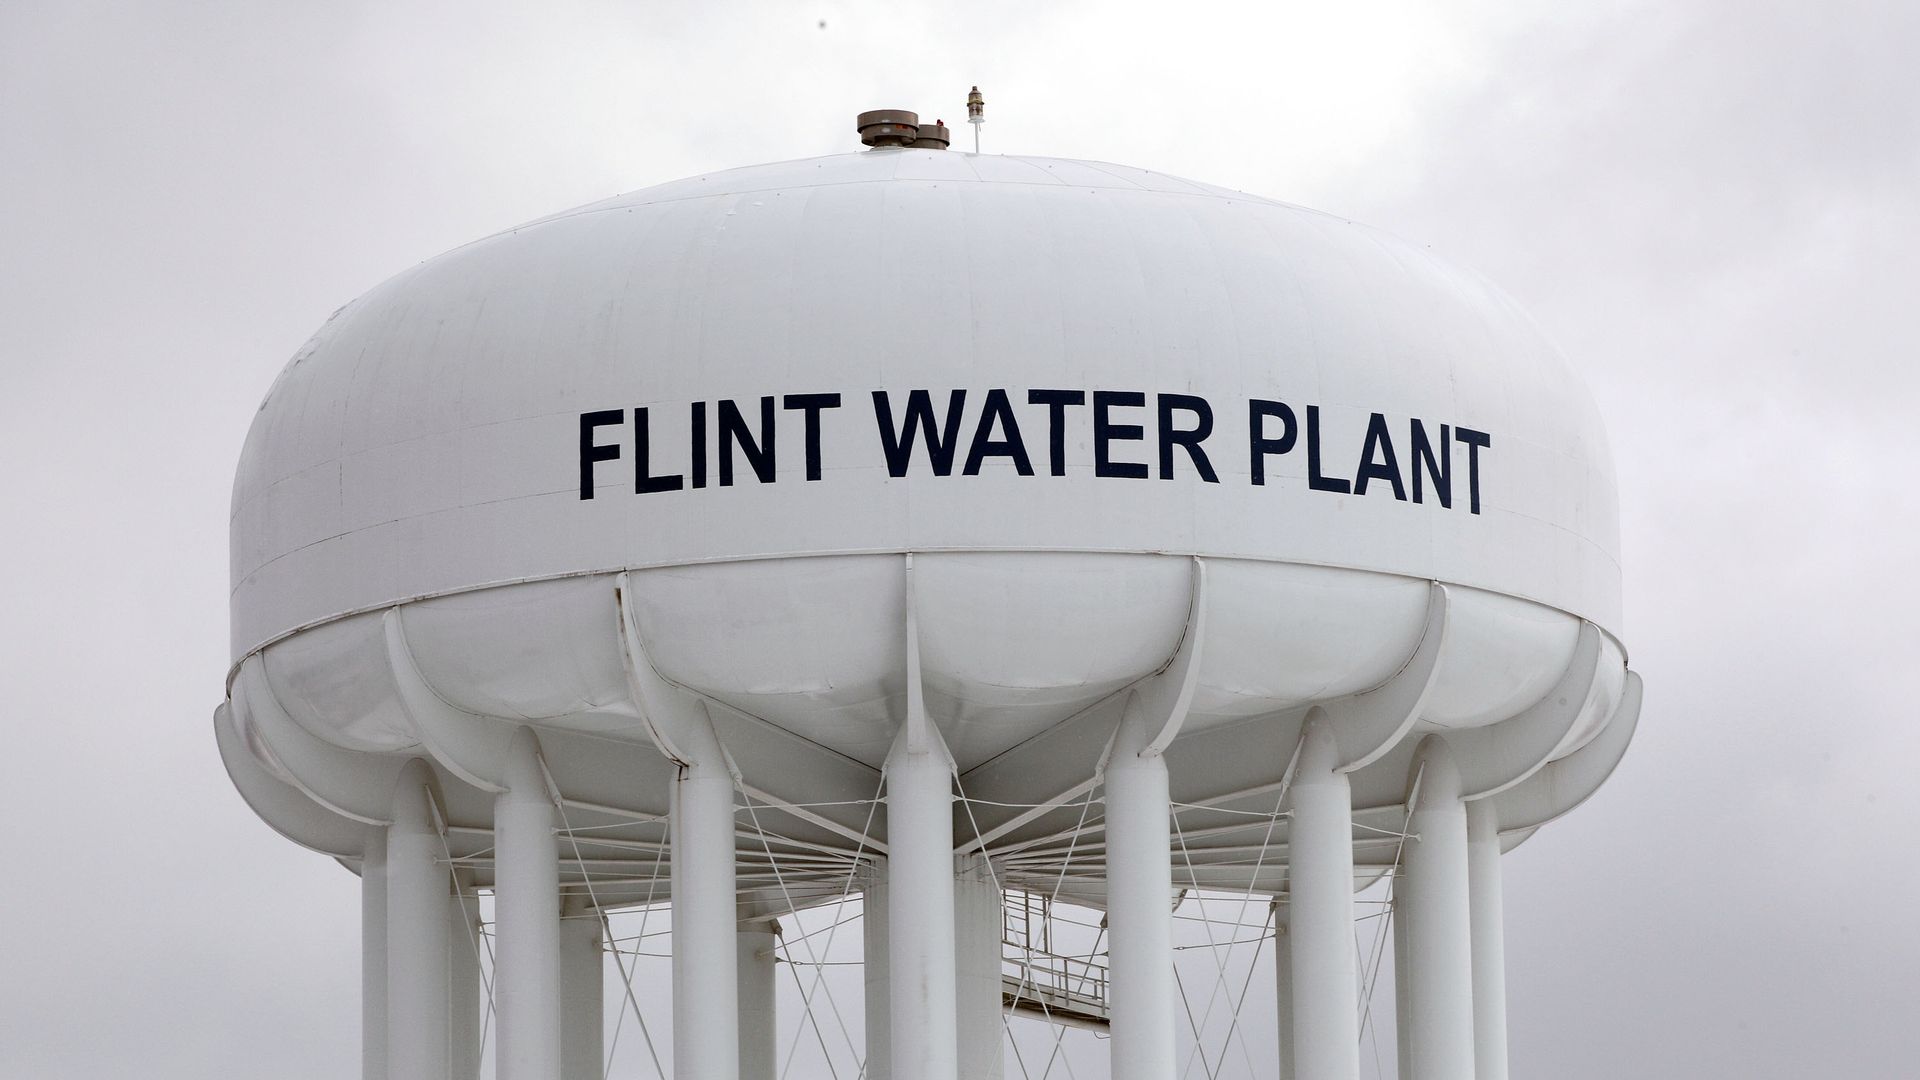 Photo of a white dome tower that says "Flint water plant" on the side